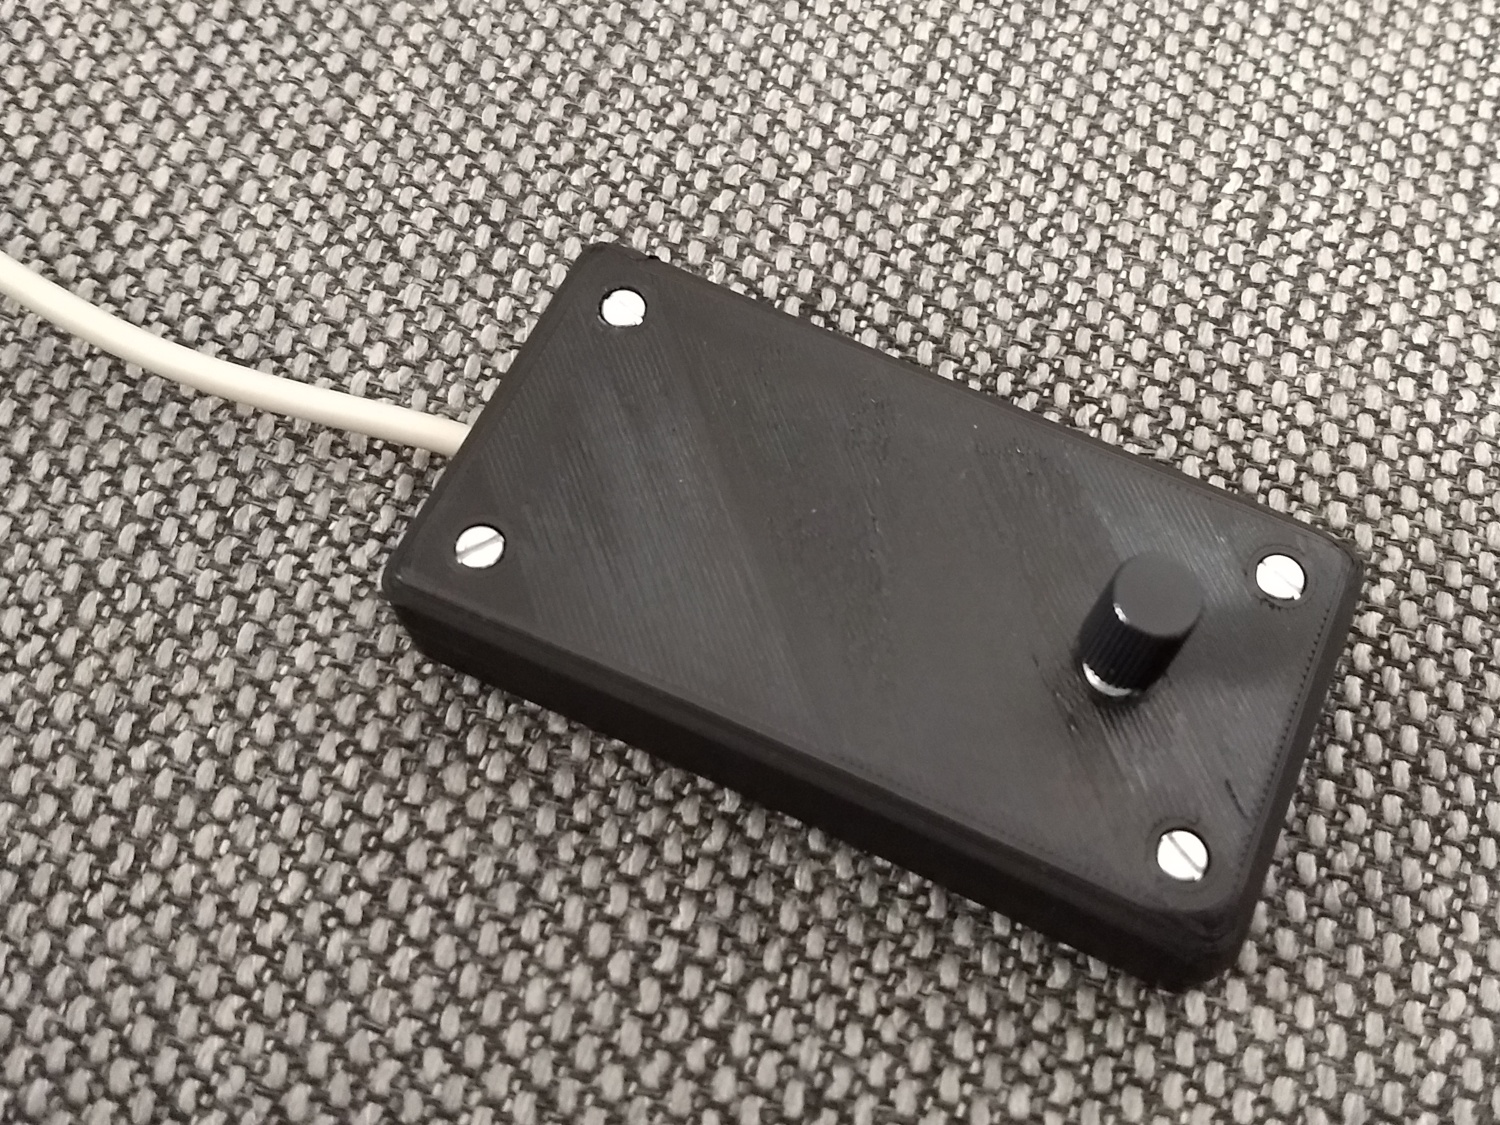 A black 3D printed case with a knob the top and a cable coming out of the side